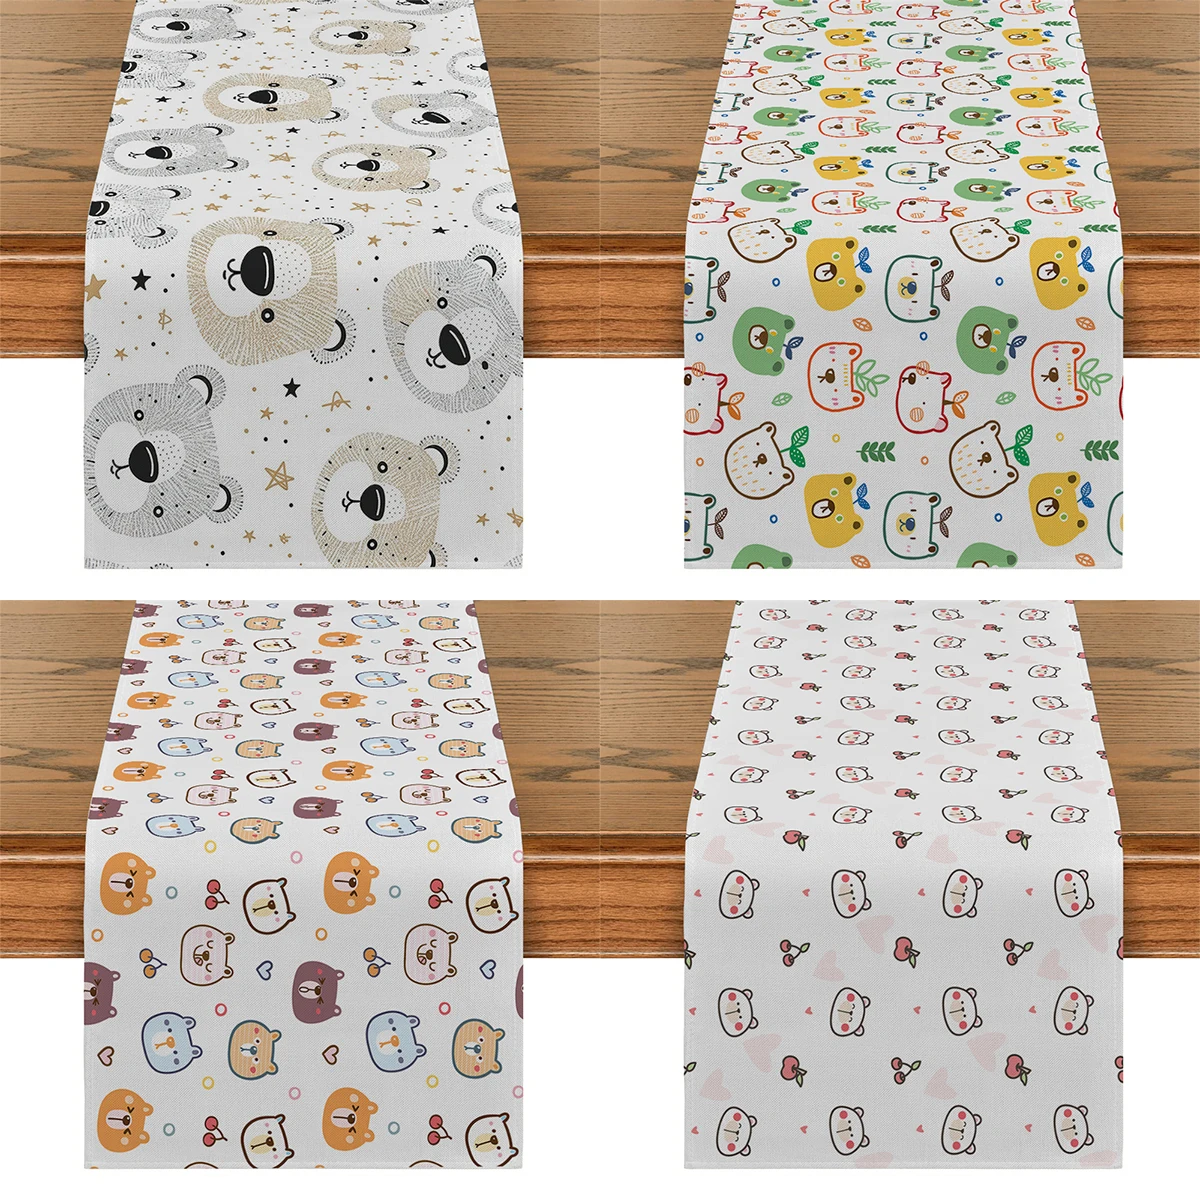 

Cute Cartoon Bear Table Flag Panda Koala Tables Runners Bee Home Kitchen Living Room Holiday Party Table Runner For Table Decor